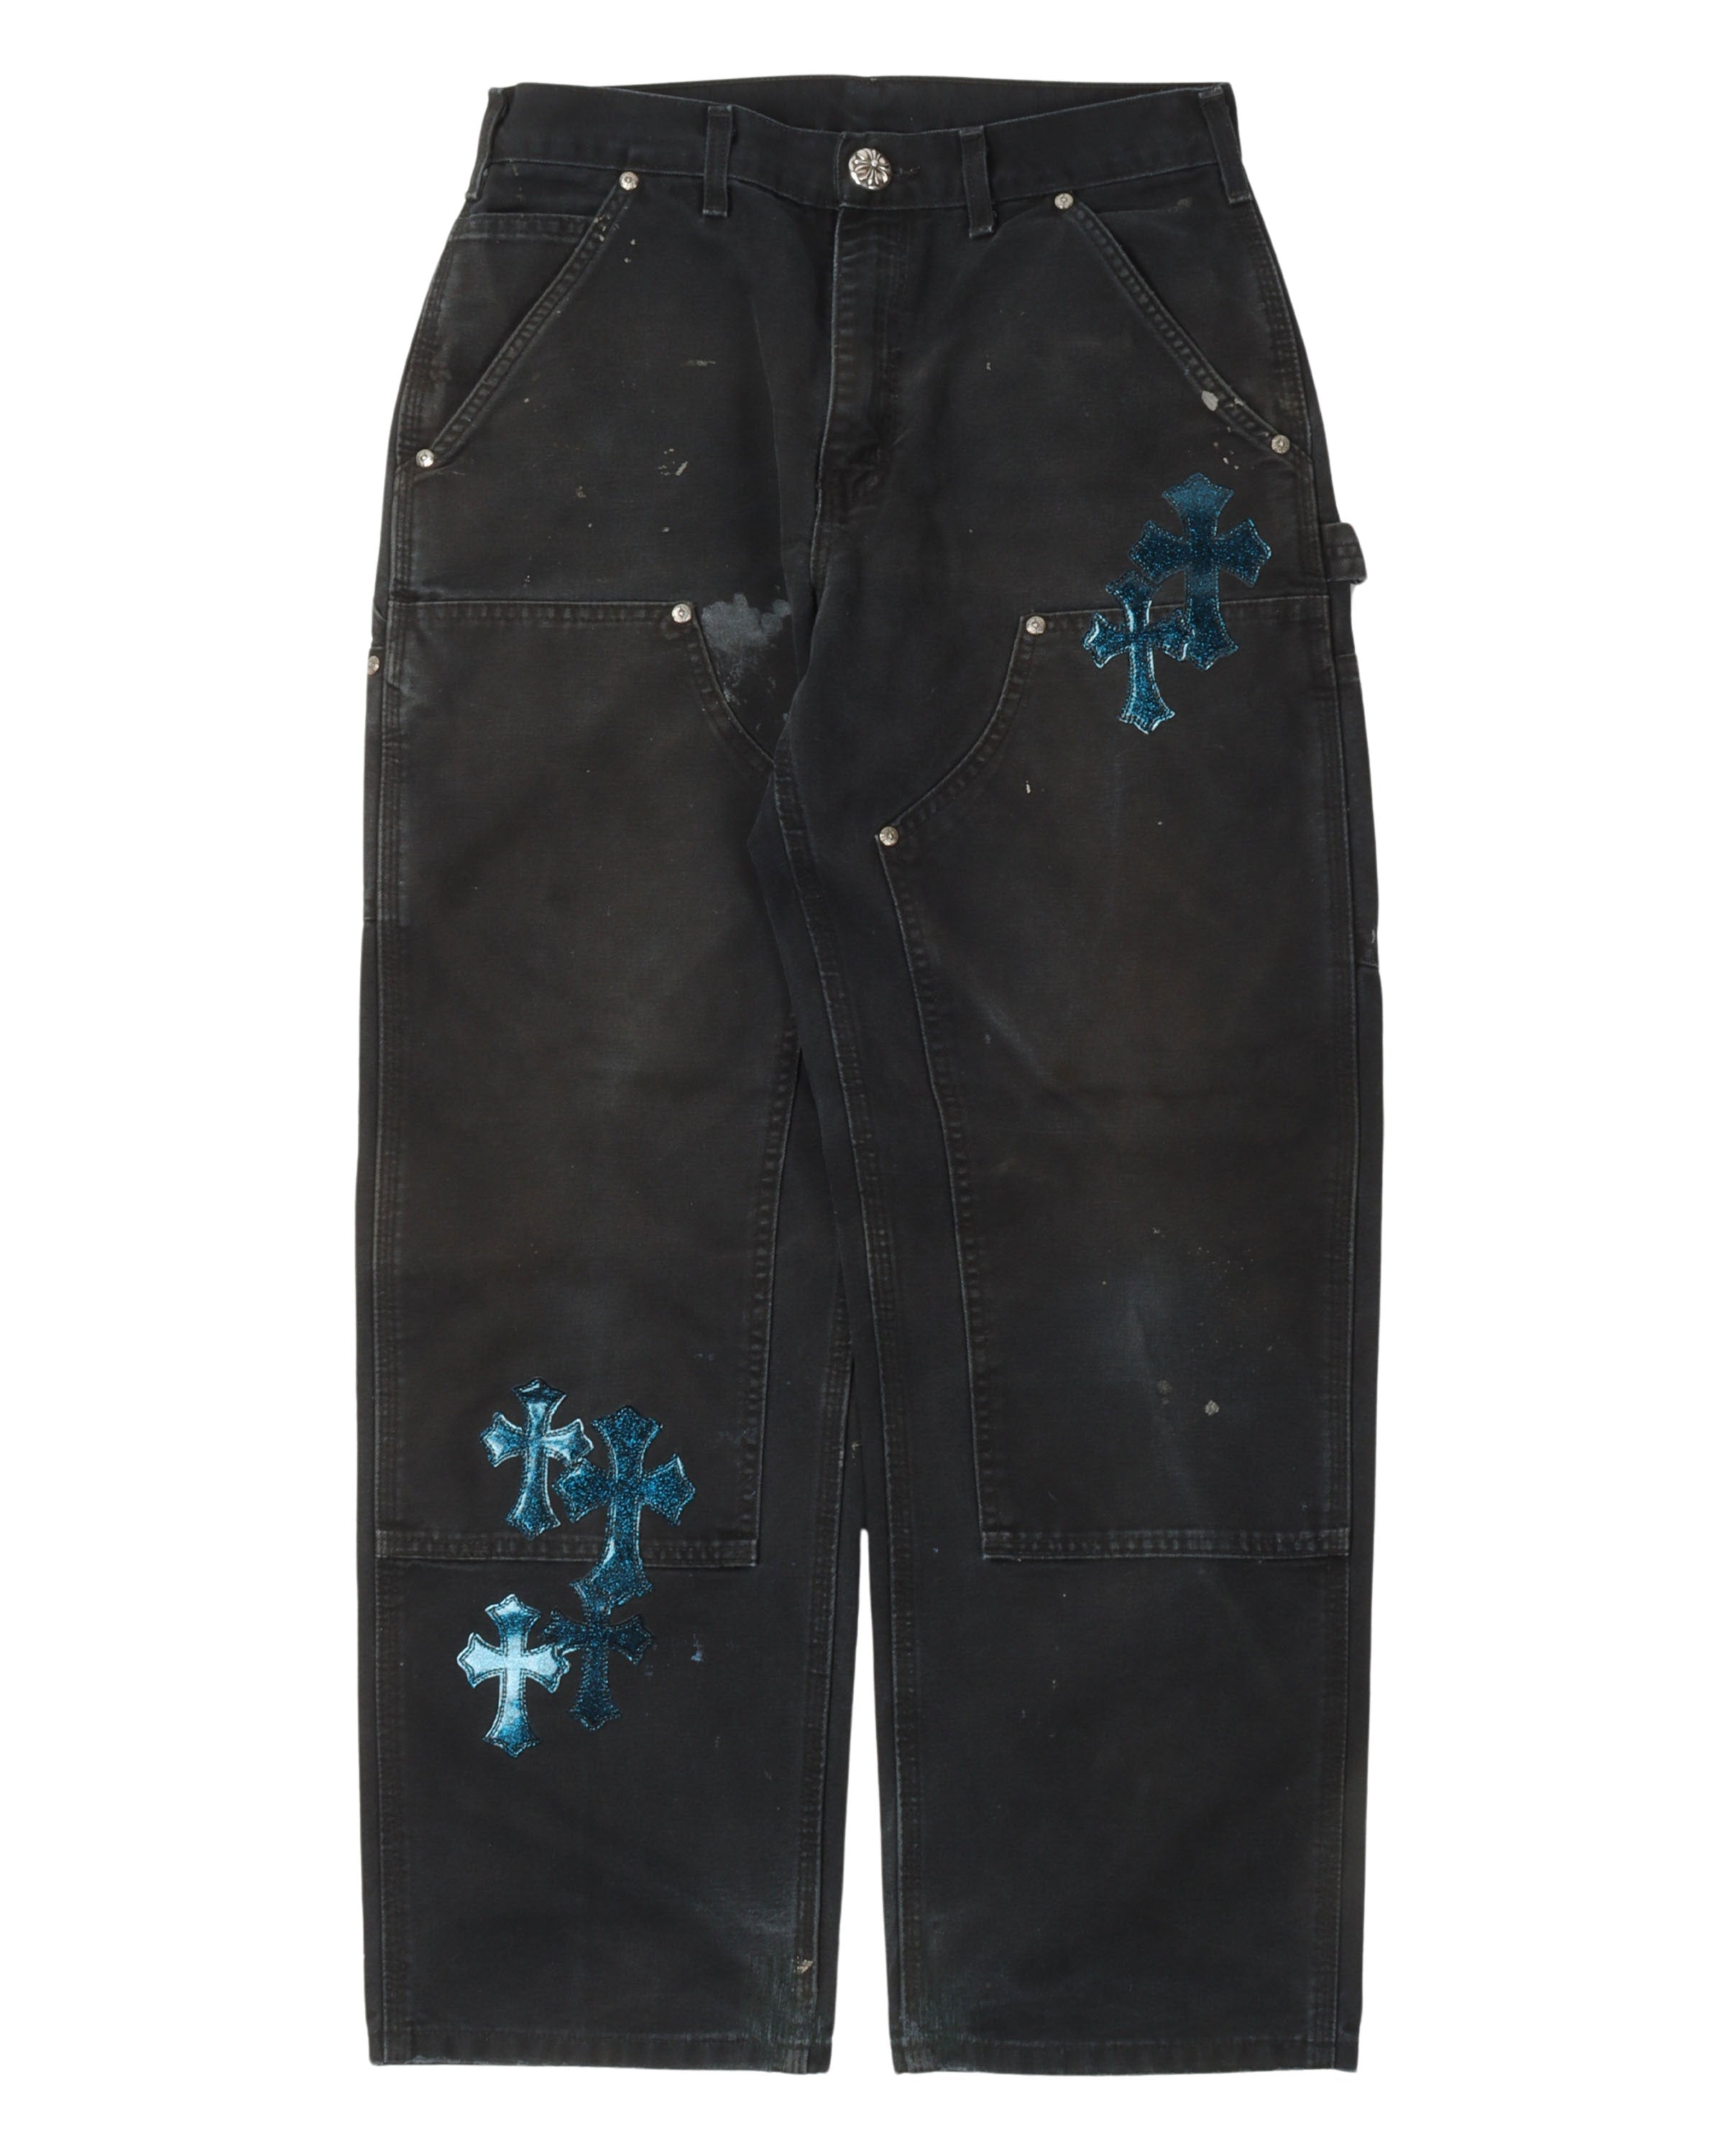 St. Barth Exclusive Carhartt Cross Patch Double Knee Carpenter Pants